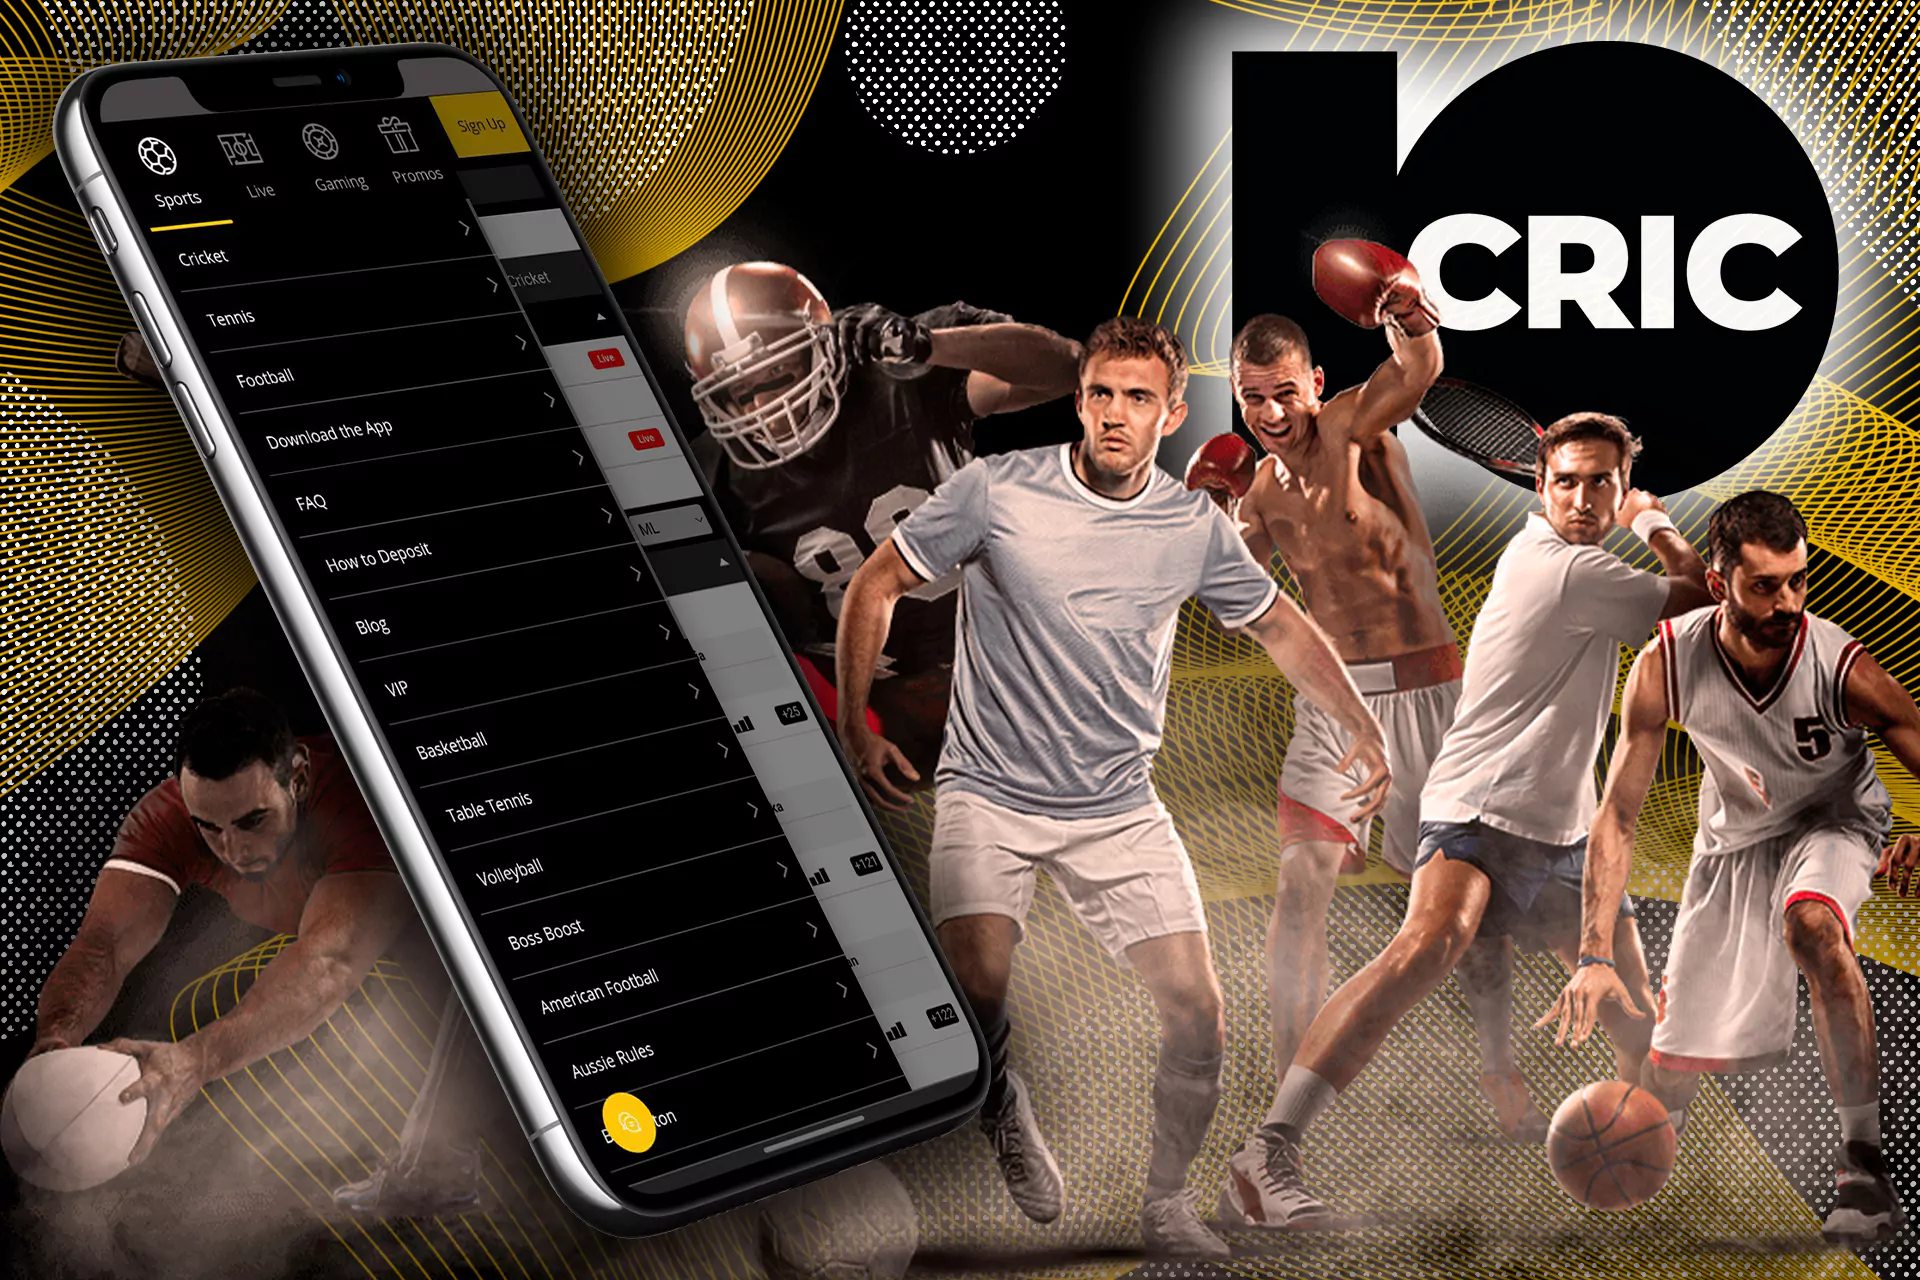 In the 10cric app, lots of sports disciplines and nearest matches are available for betting.